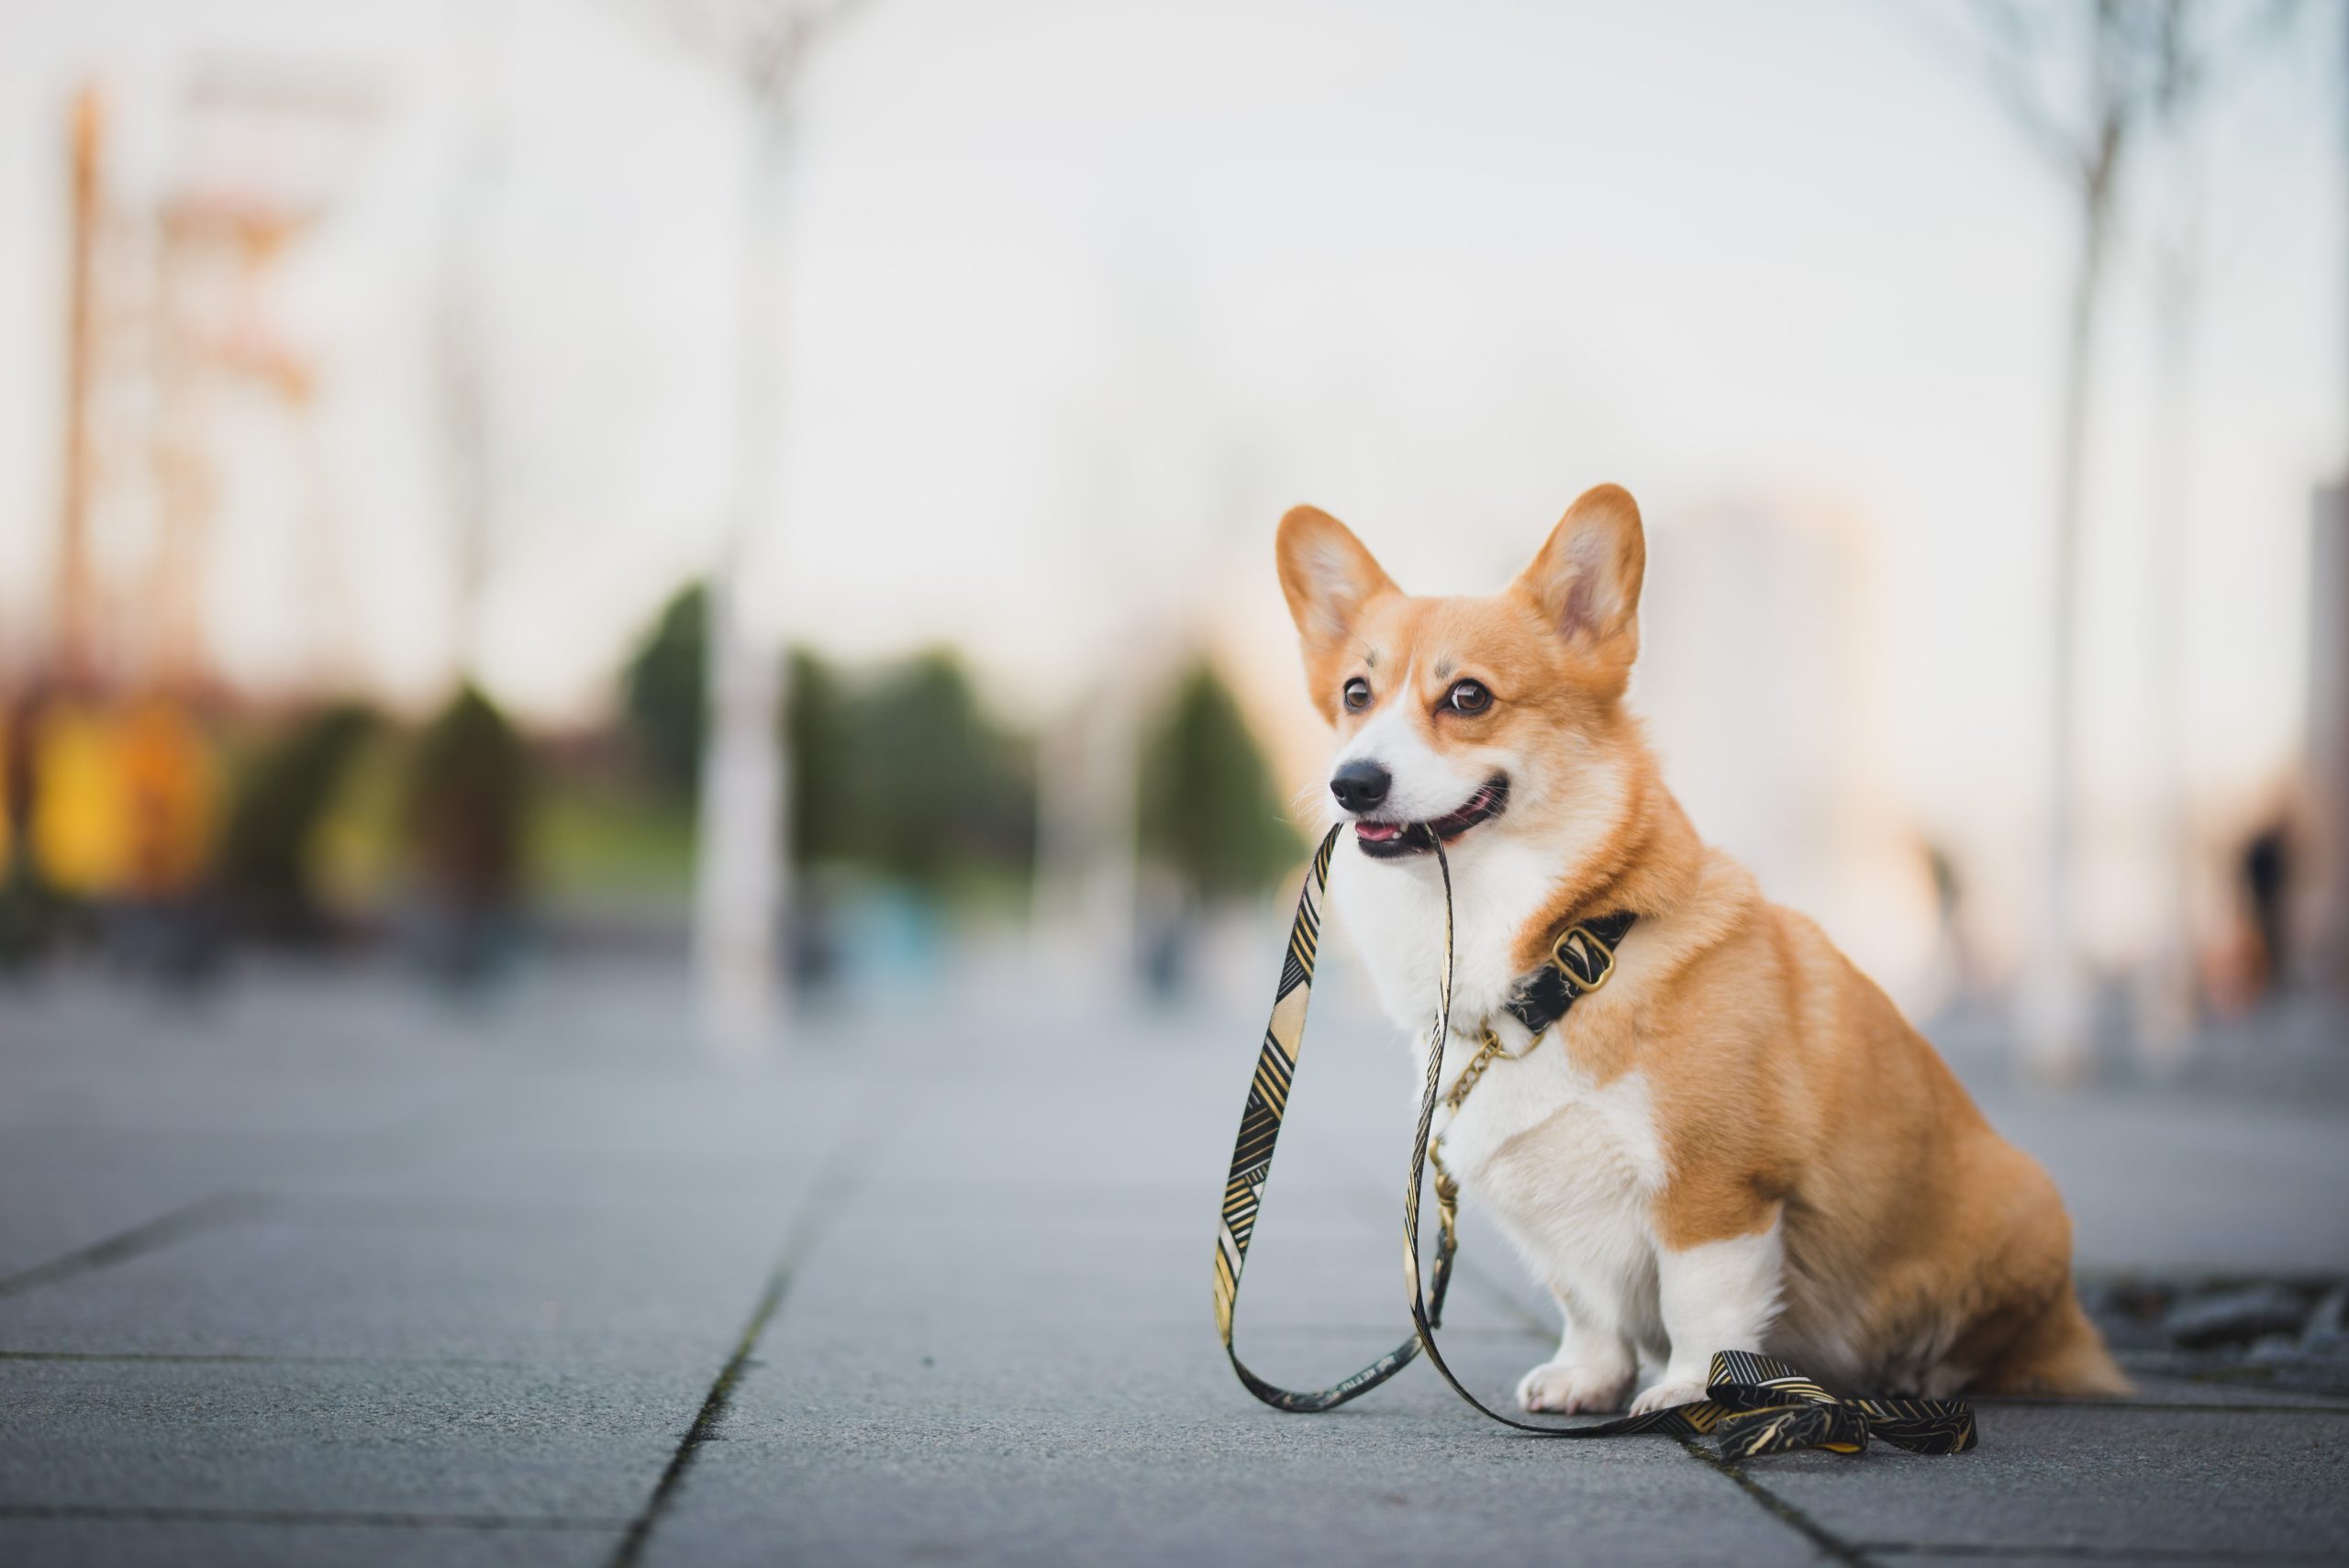 Corgi is holding its yellow, black and white patterned leash in its mouth while sitting outside.